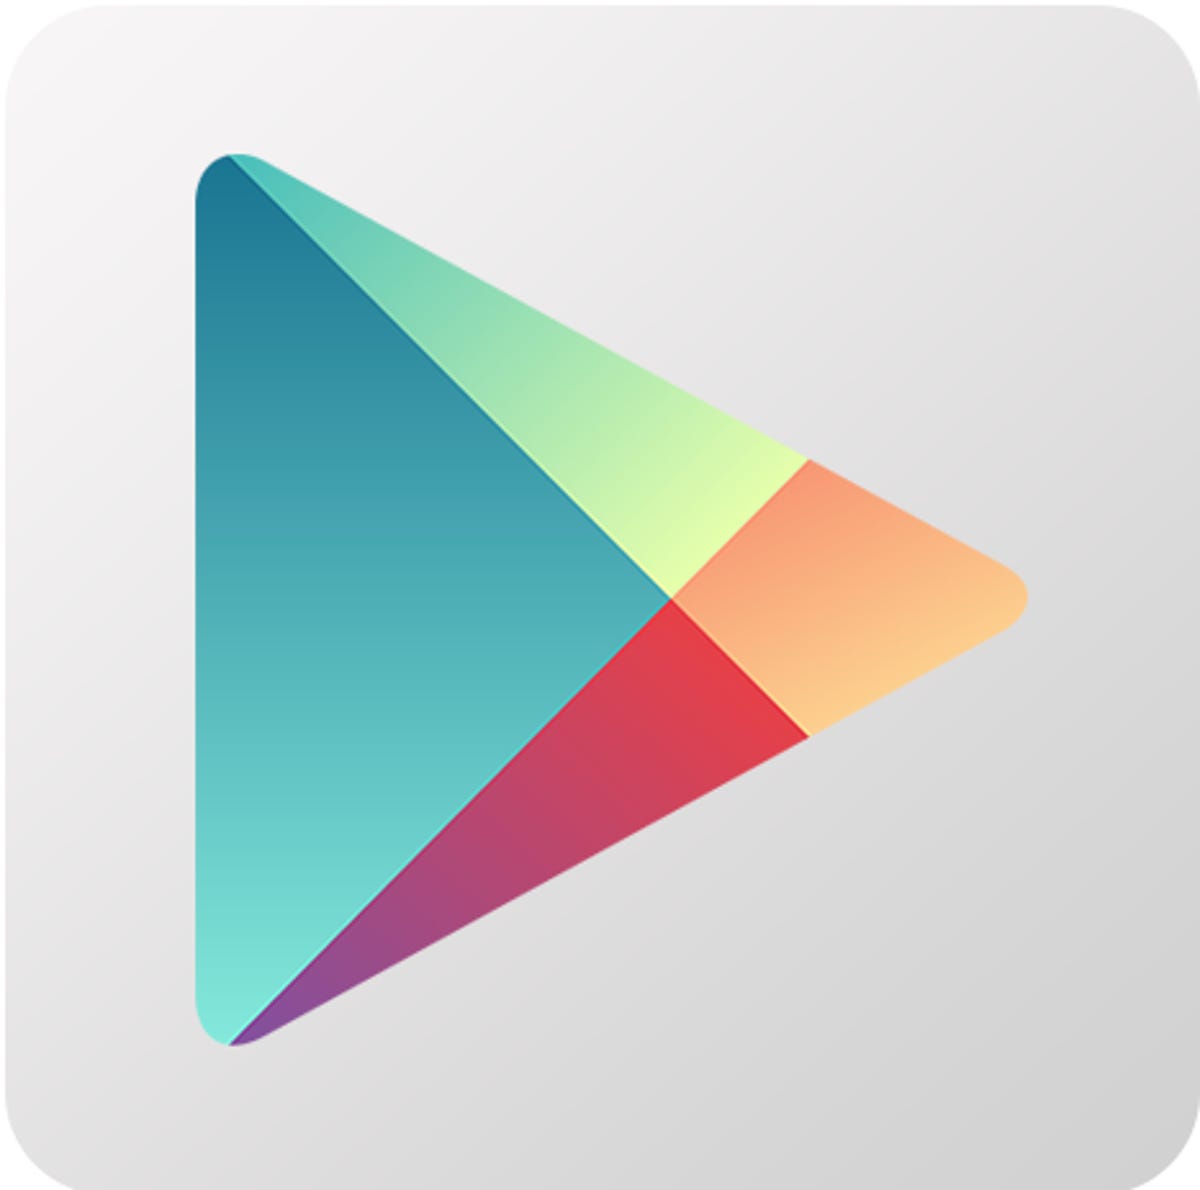 5-google-play-iconstore-zdnet-eileen-brown.png